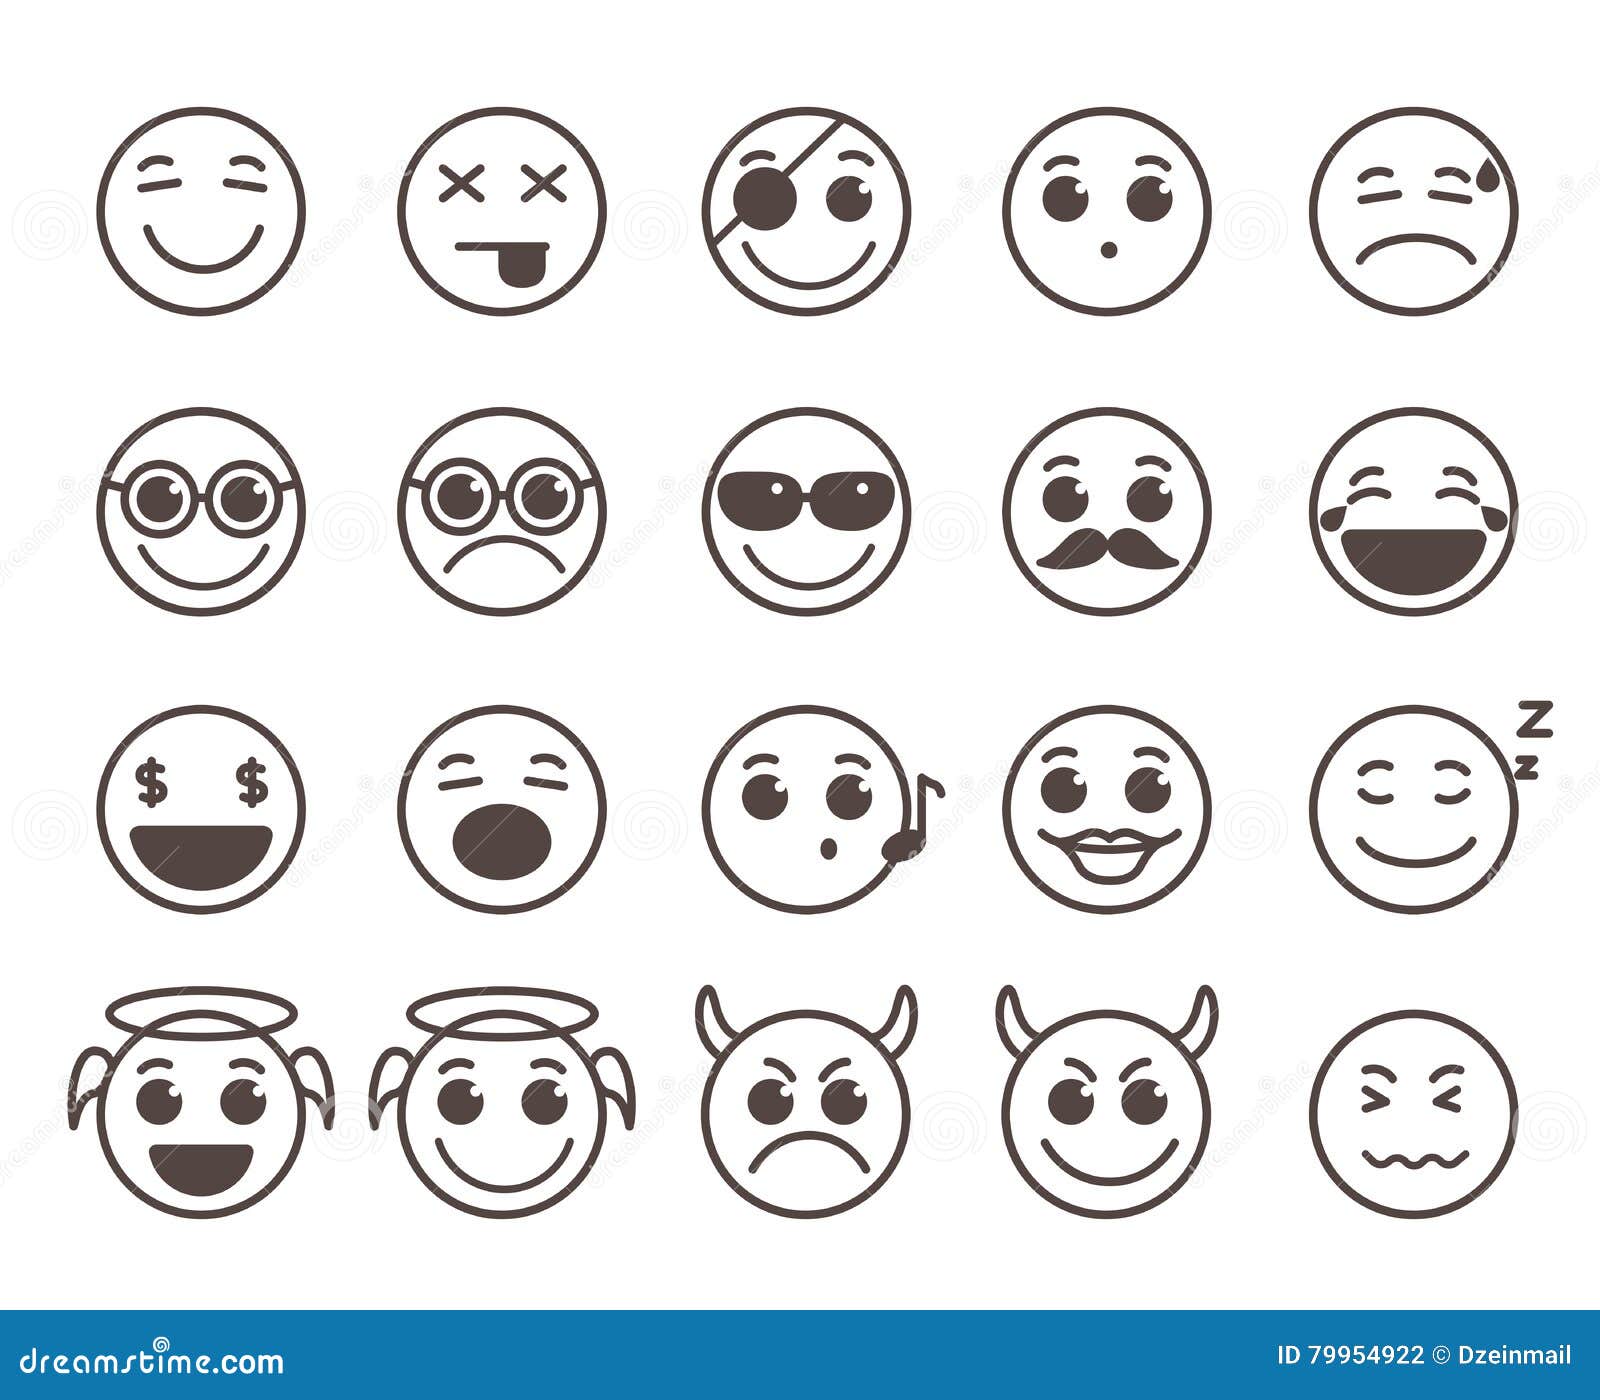 Smileys Faces Flat Line Vector Icons Set With Funny Facial 